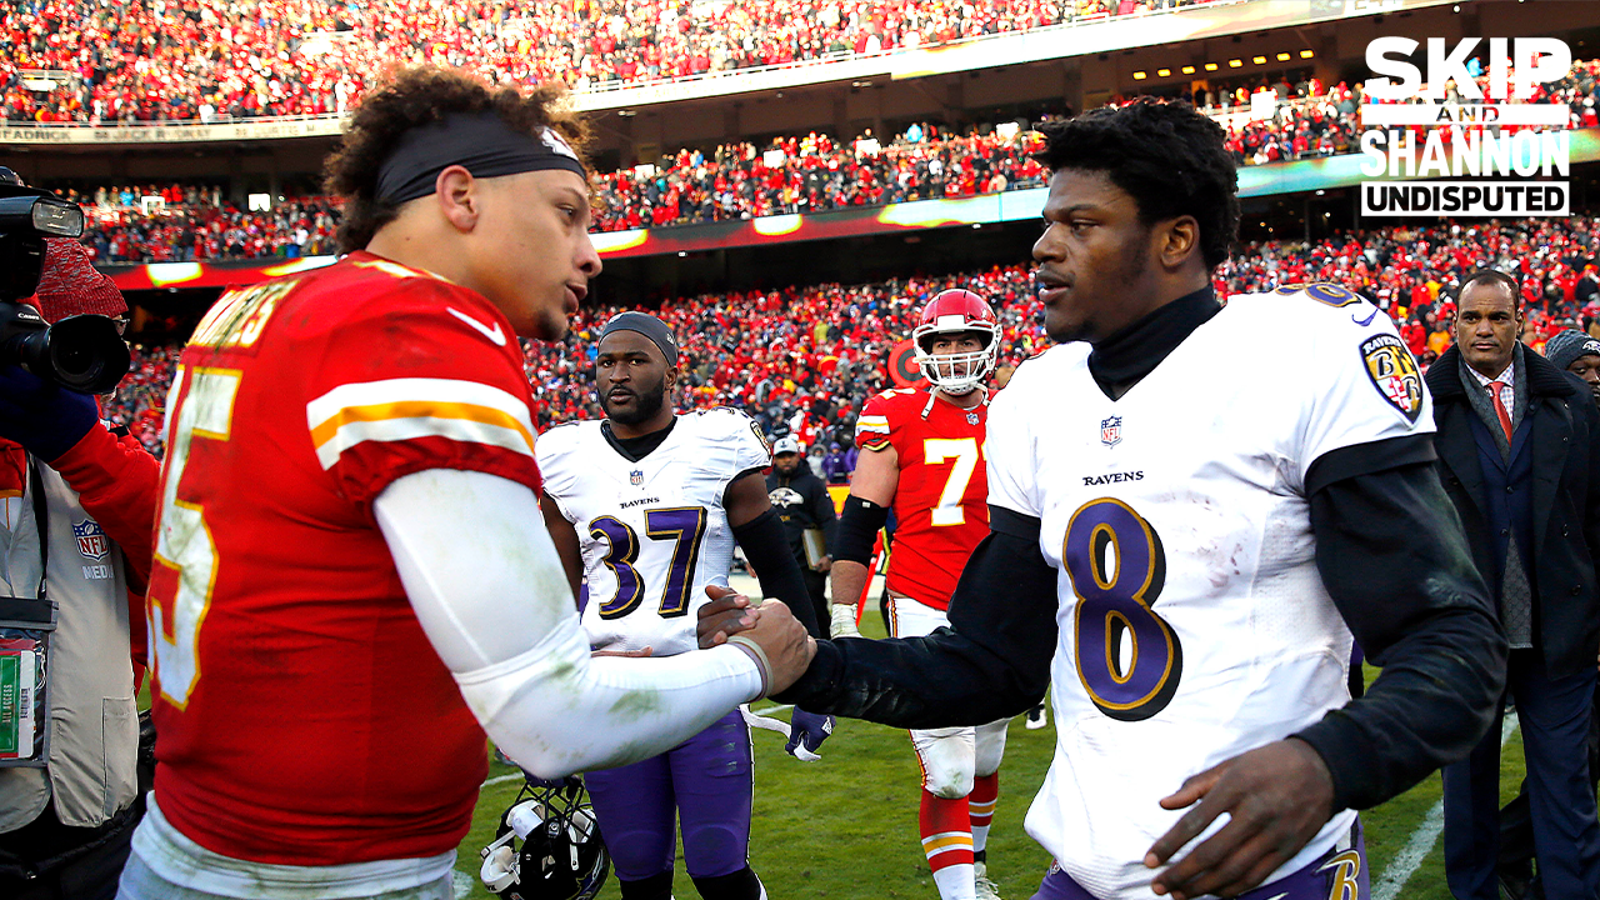 "Lamar Jackson has never had a better team than the Chiefs" — Shannon Sharpe speaks on Mahomes vs. Lamar rivalry I UNDISPUTED